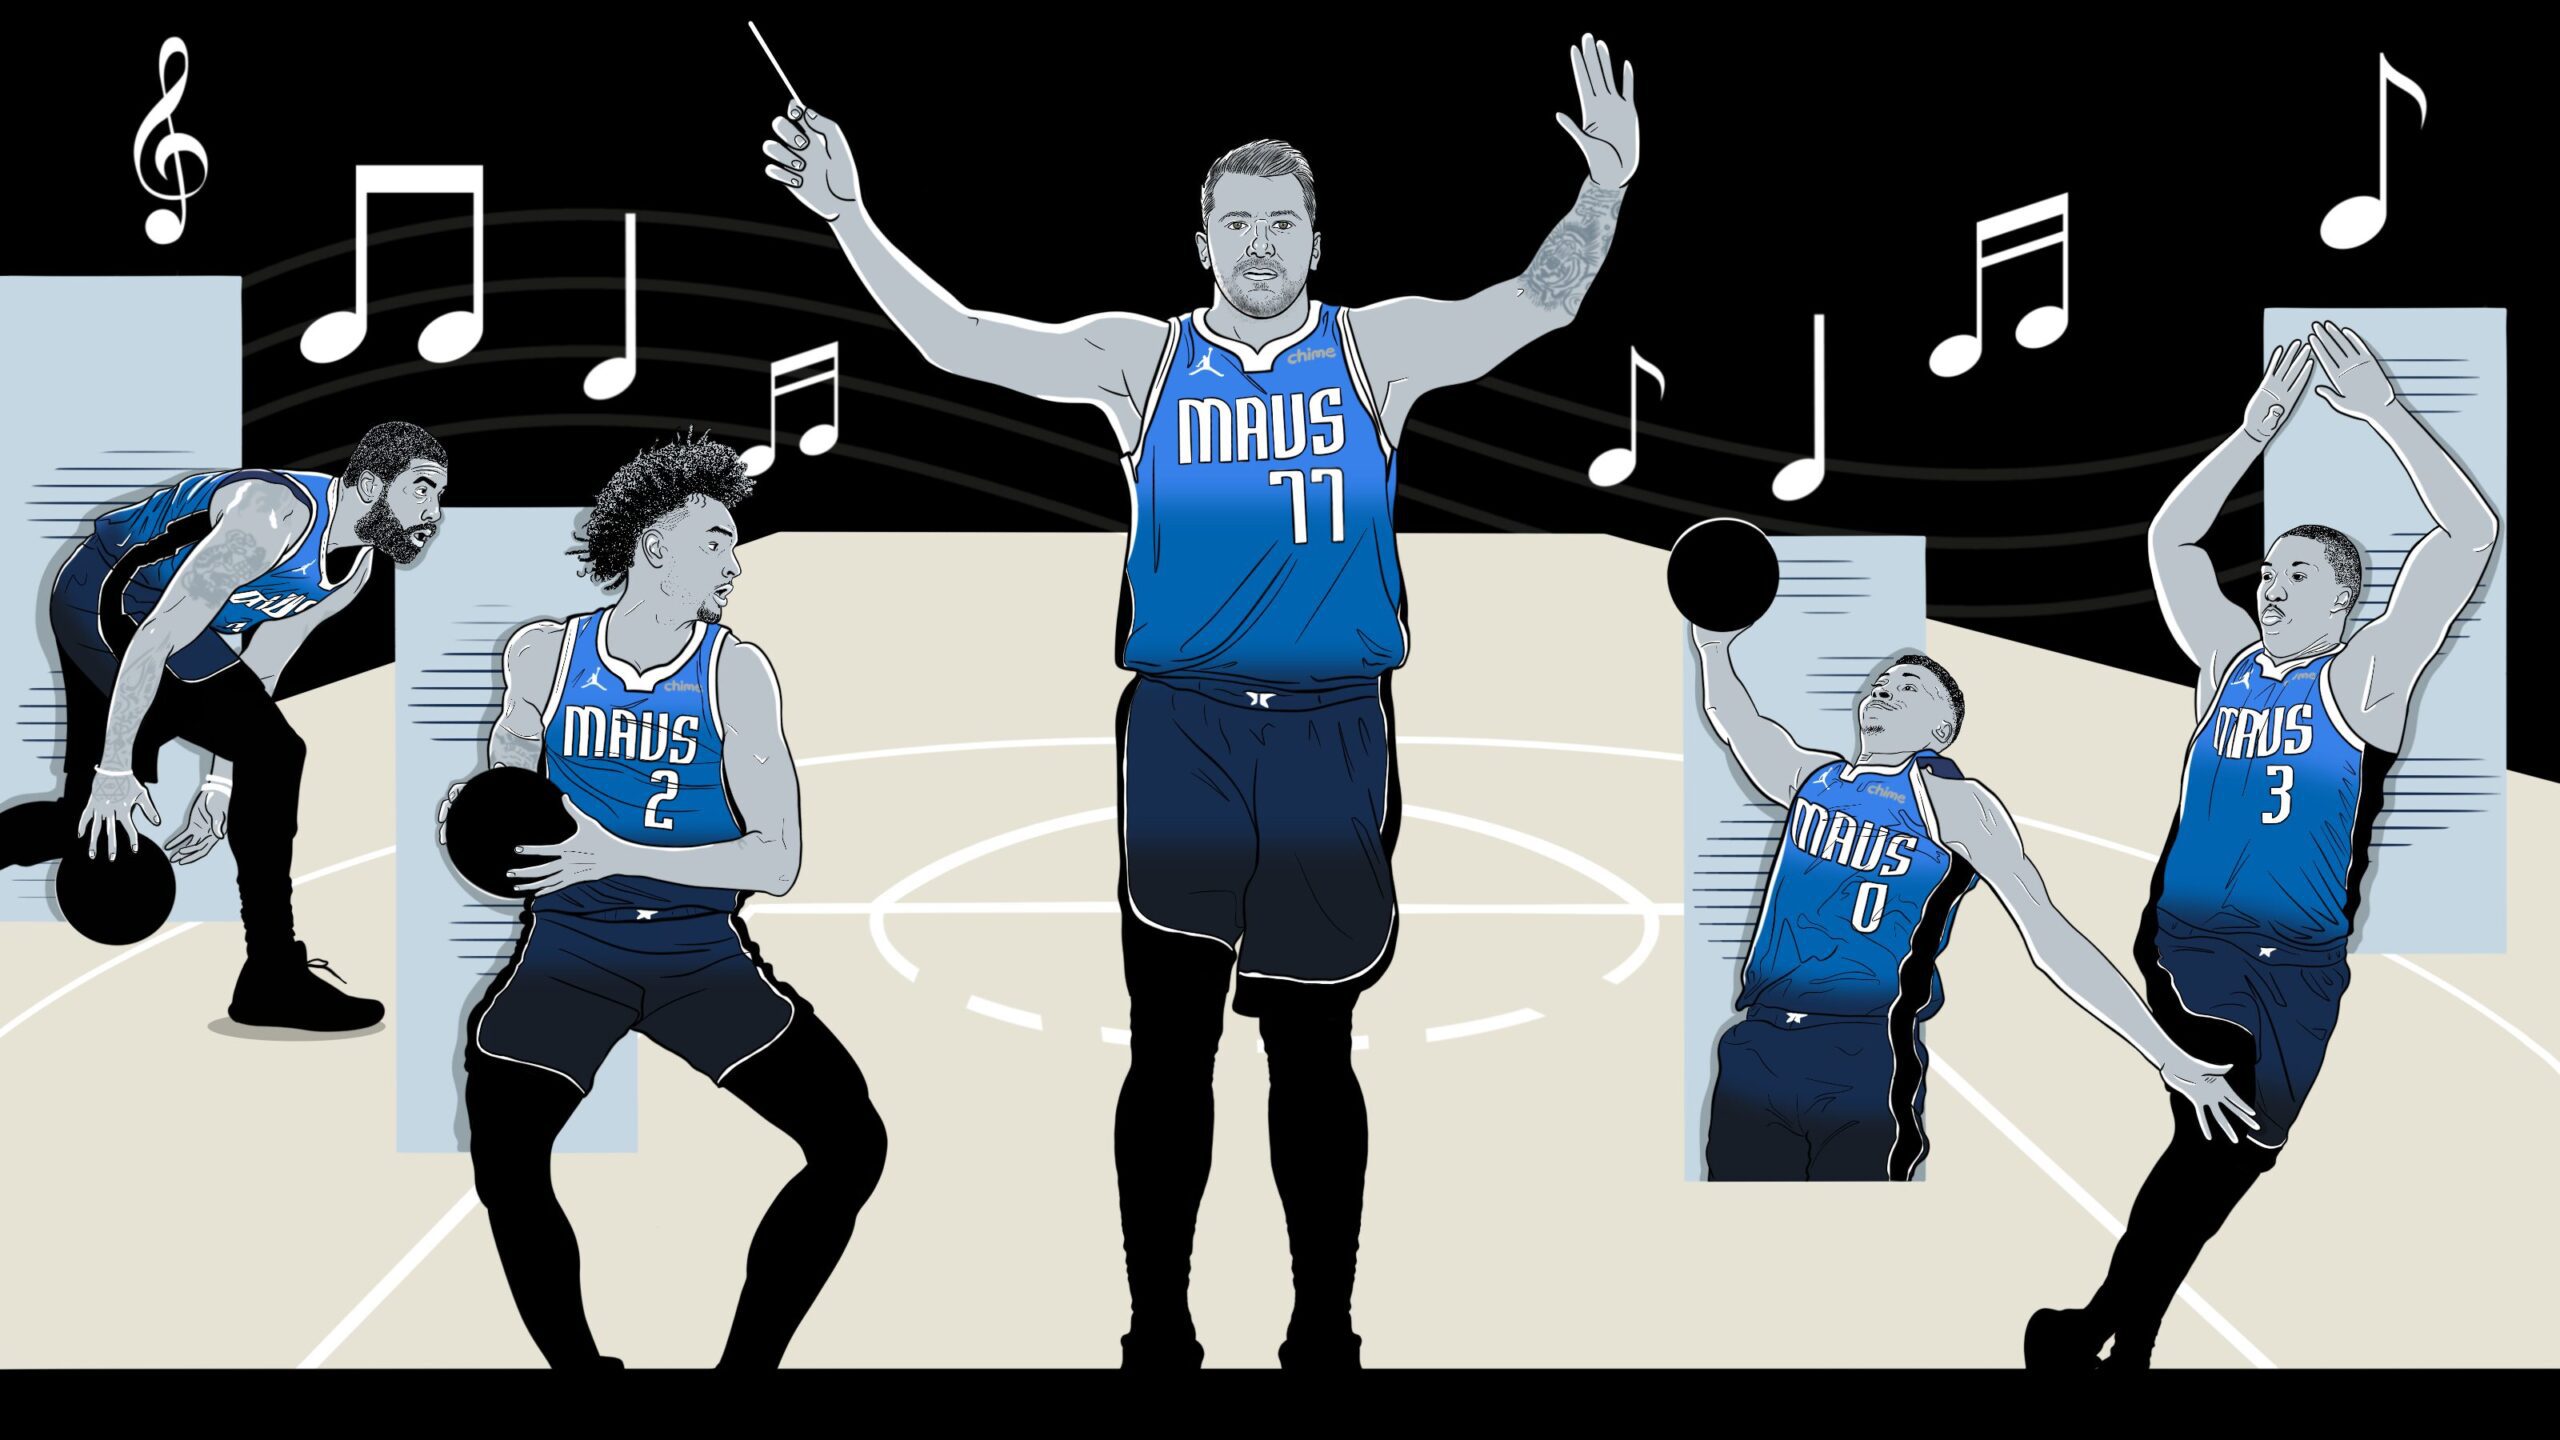 Dallas Mavericks' strategic evolution around Luka Doncic's dynamic role, emphasizing athleticism, length, and defense in building a successful team. Visual representation of team dynamics and player contributions by Peruvian, Italian illustrator and visual artist Alonso Guzmán Barone for The Ringer.